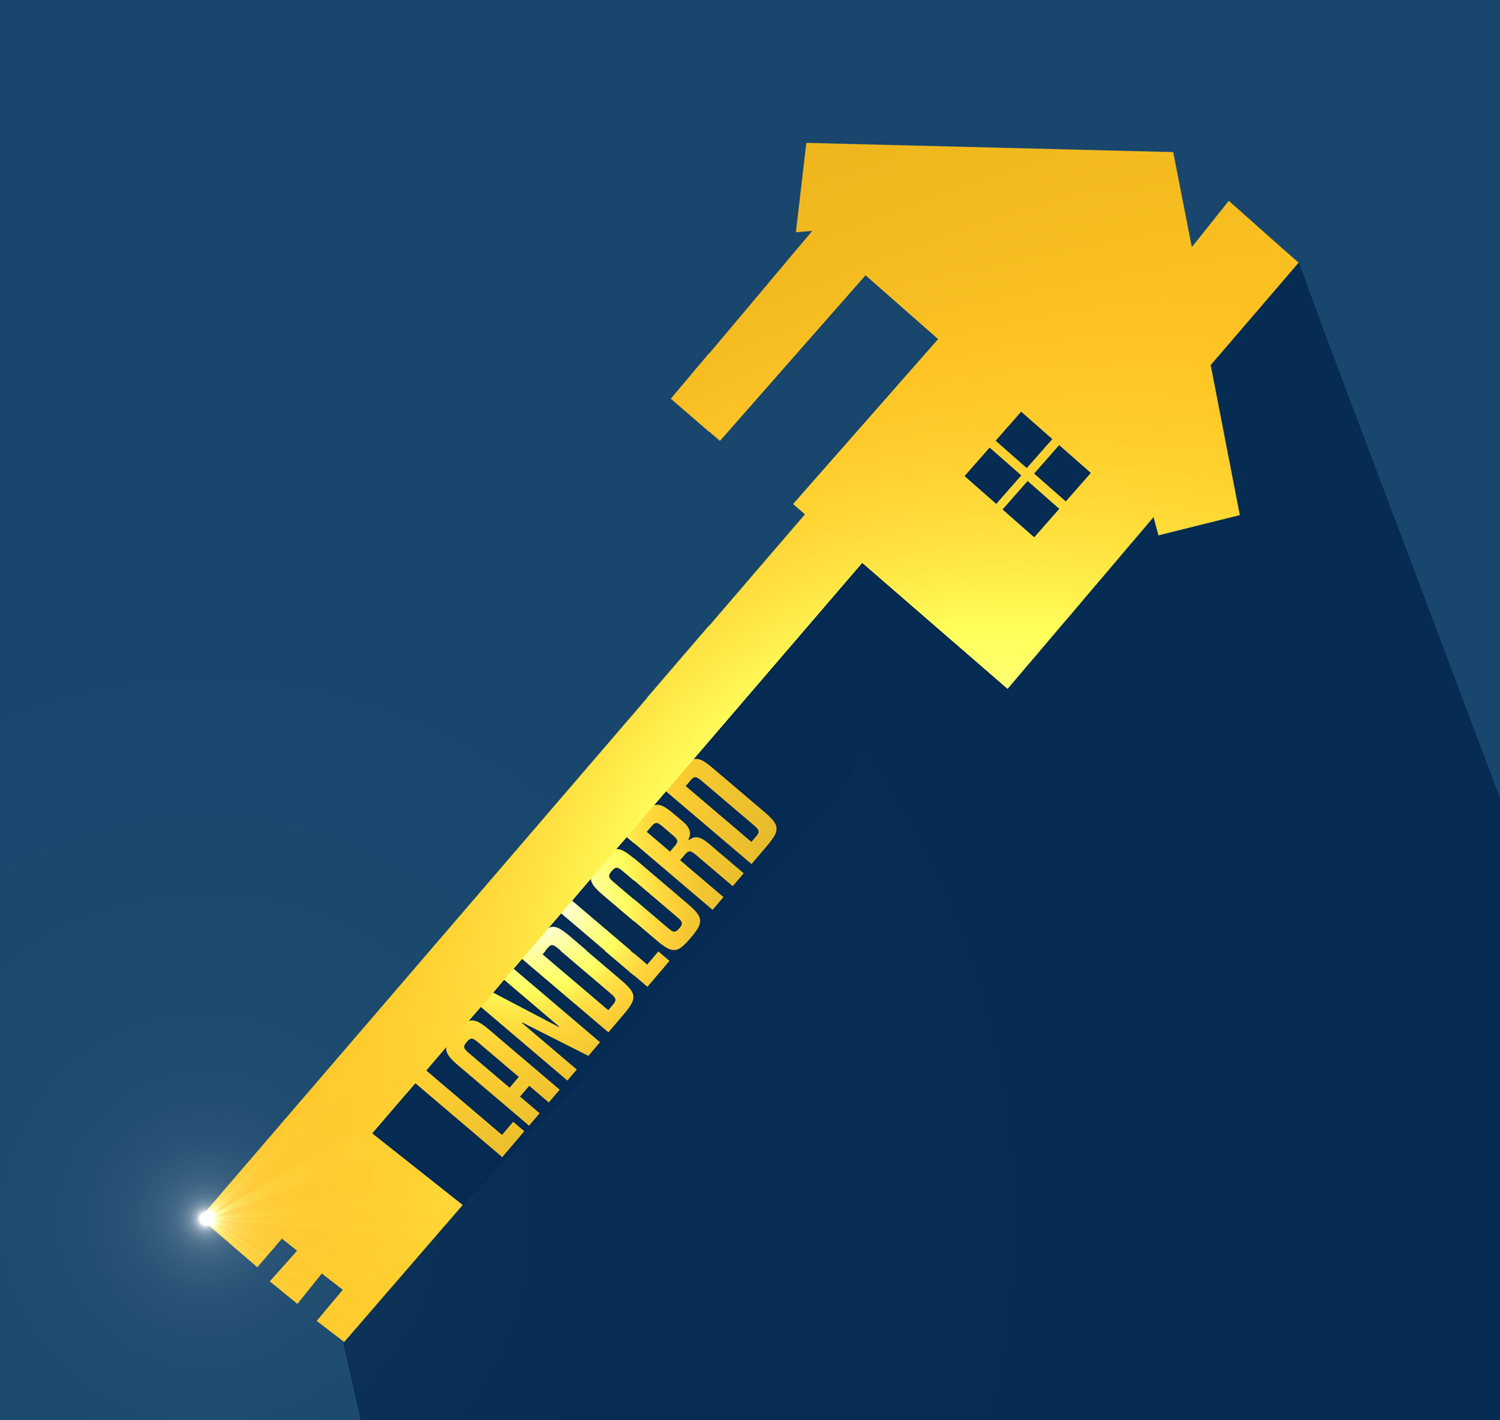 Graphic image of a home as a key that says "Landlord"